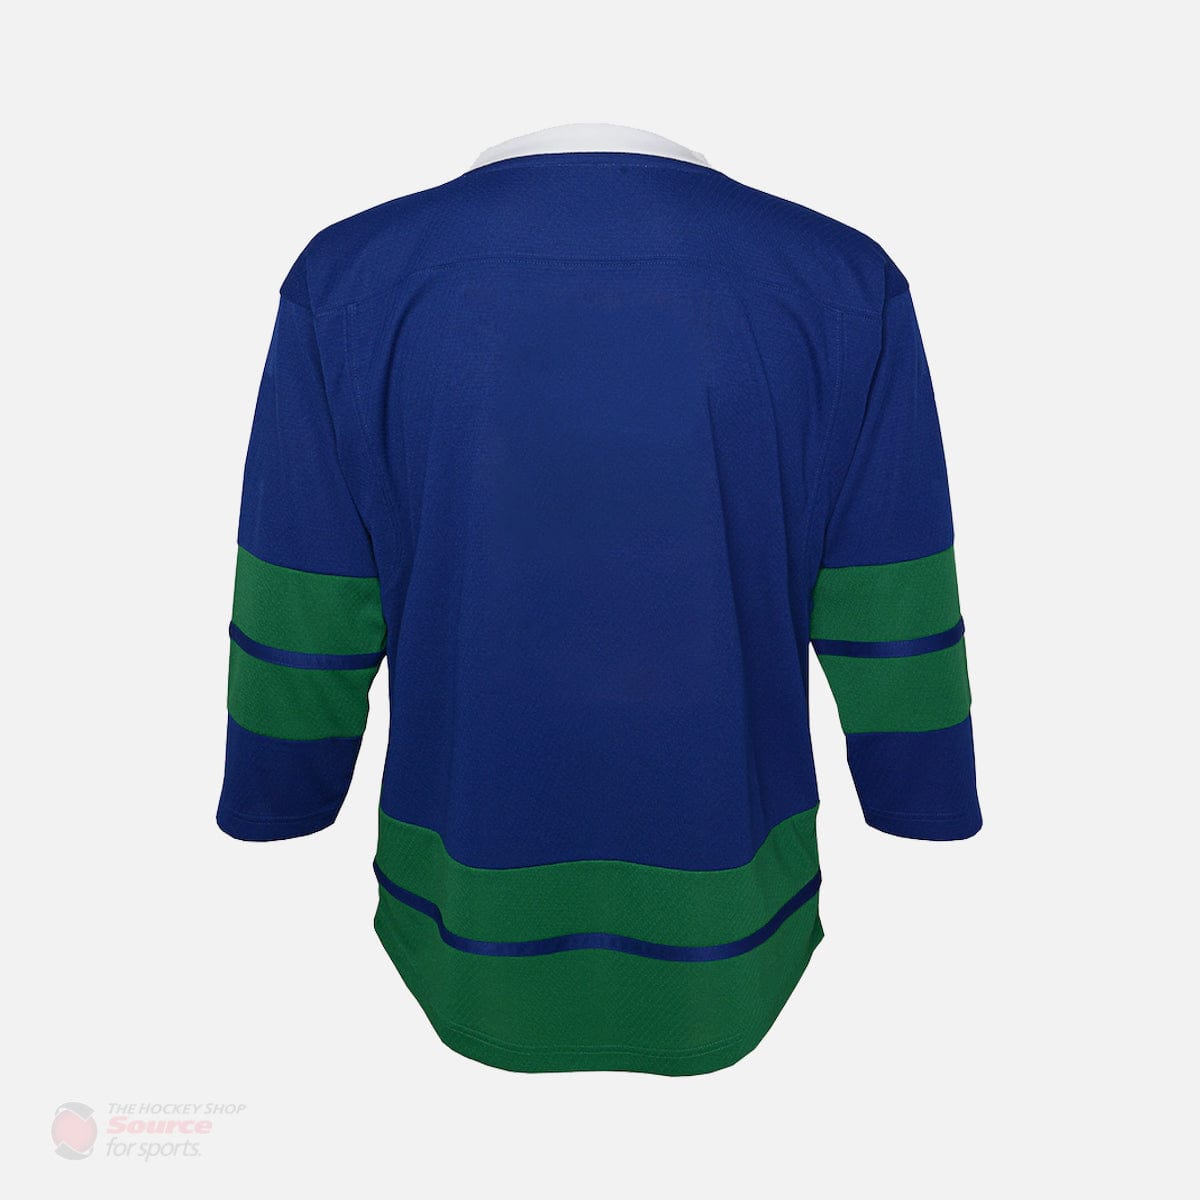 Vancouver Canucks Alternate Outer Stuff Replica Toddler Jersey